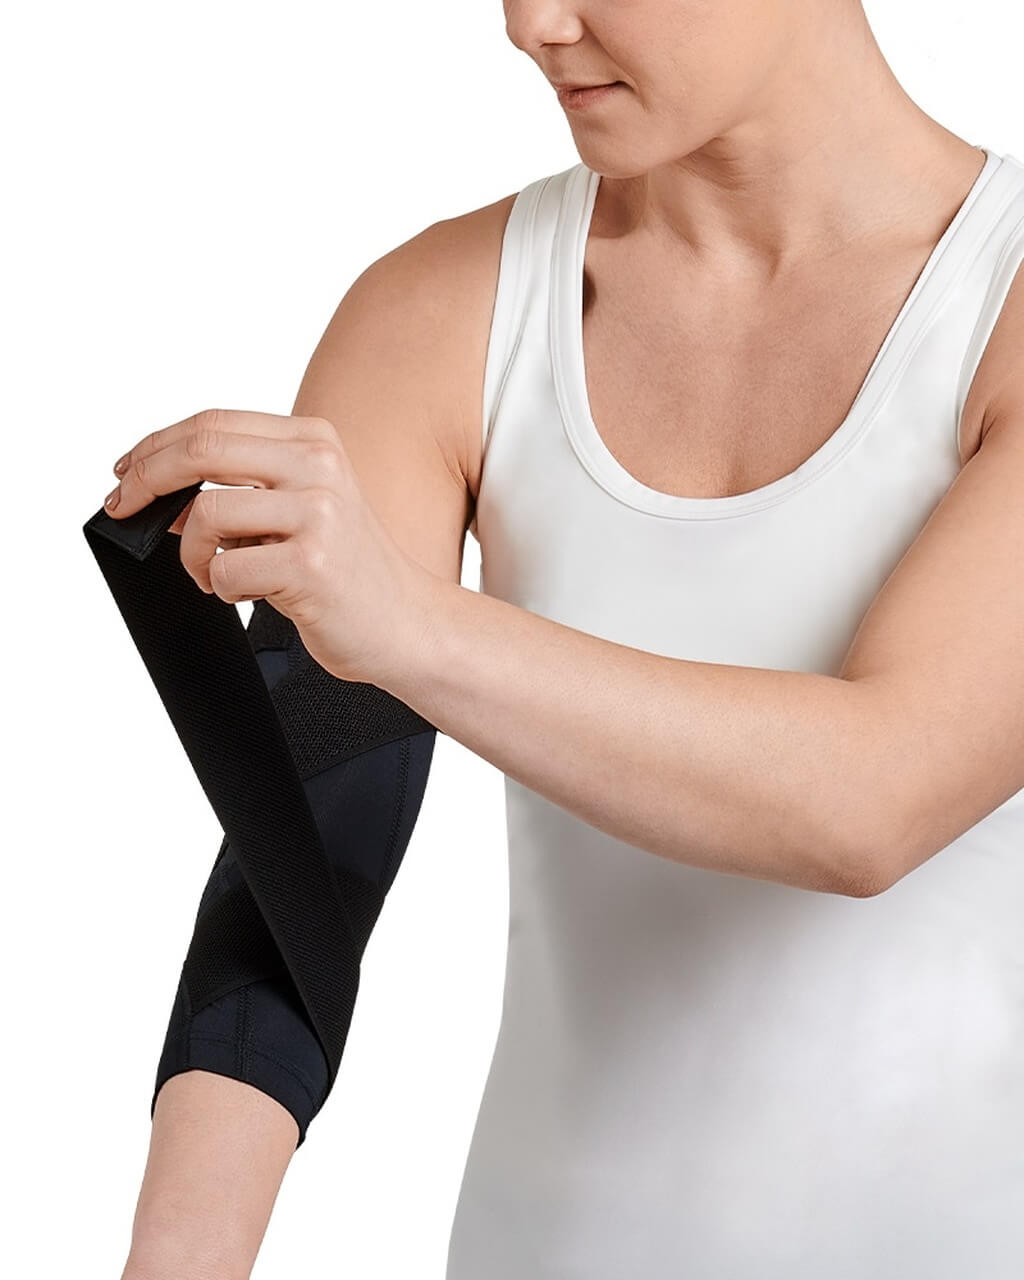 COPPER HEAL Elbow Compression Sleeve - Best Medical Recovery Elbow